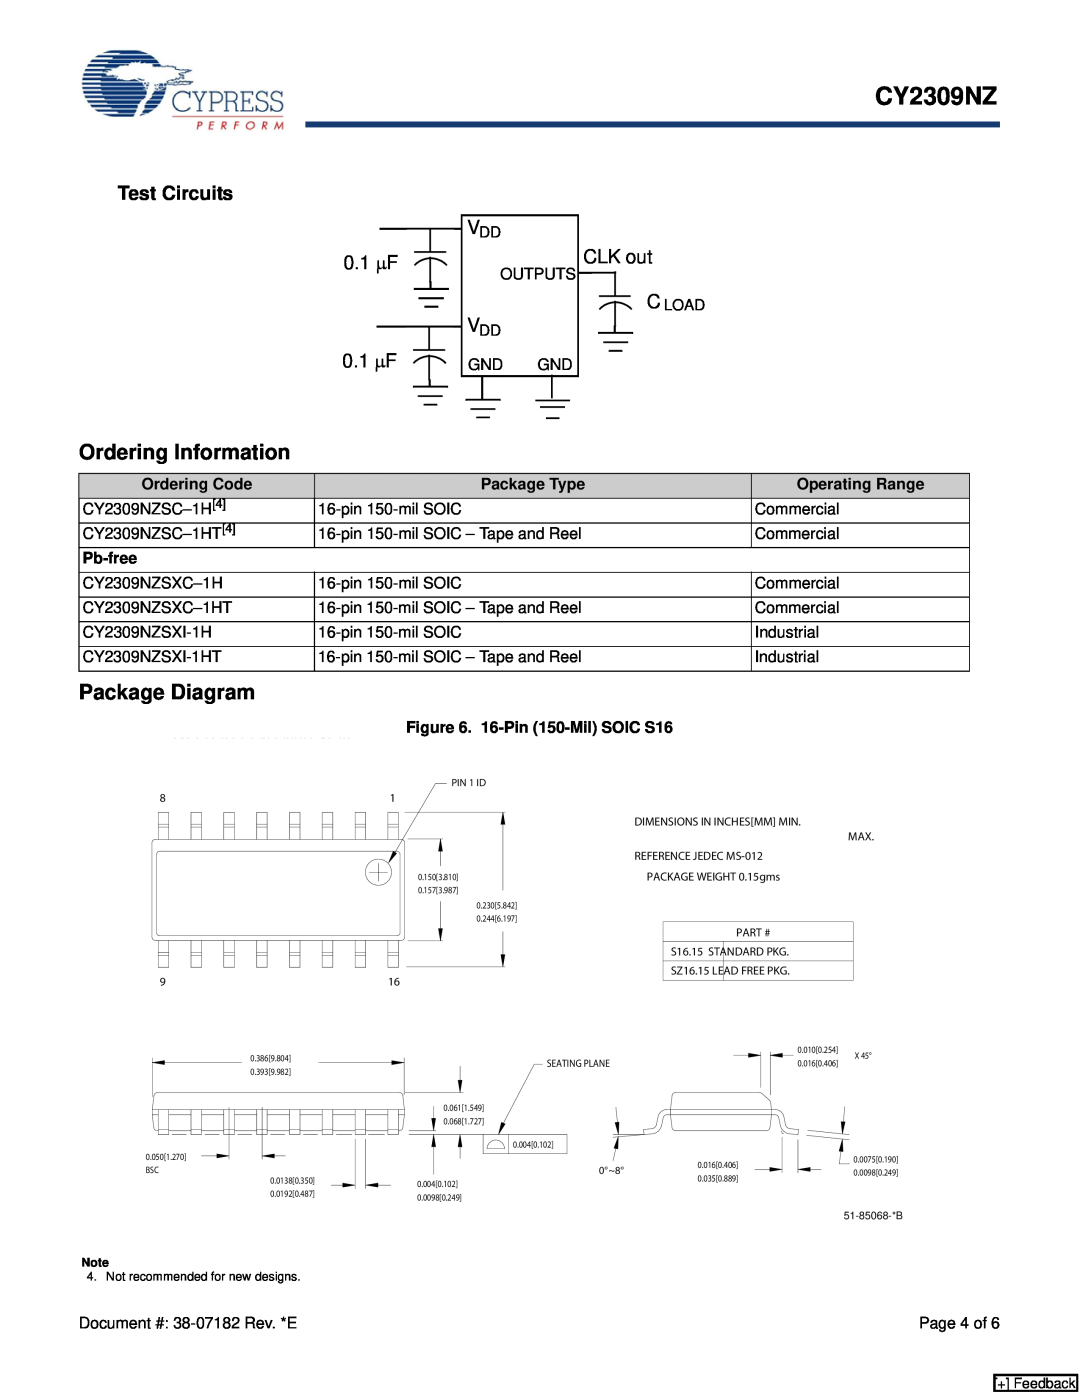 Cypress CY2309NZ manual Ordering Information, Package Diagram, Test Circuits, 0.1 μF 0.1 μF, CLK out 